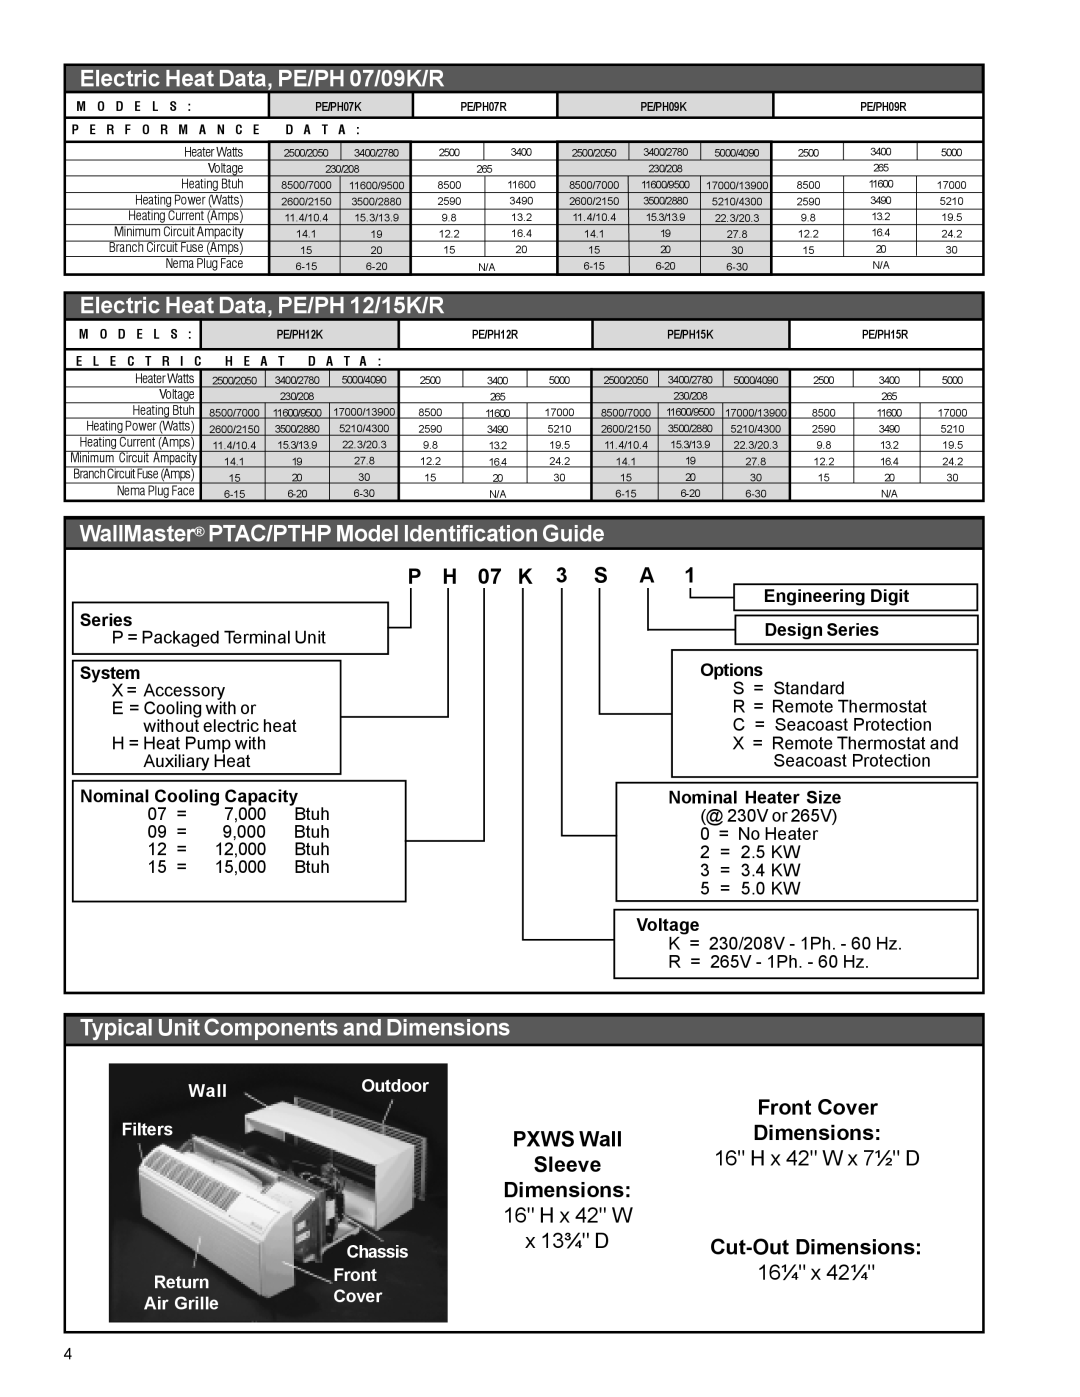 Friedrich PACKAGED TERMINAL AIR CONDITIONERS AND HEAT PUMPS manual Electric Heat Data, PE/PH 07/09K/R 